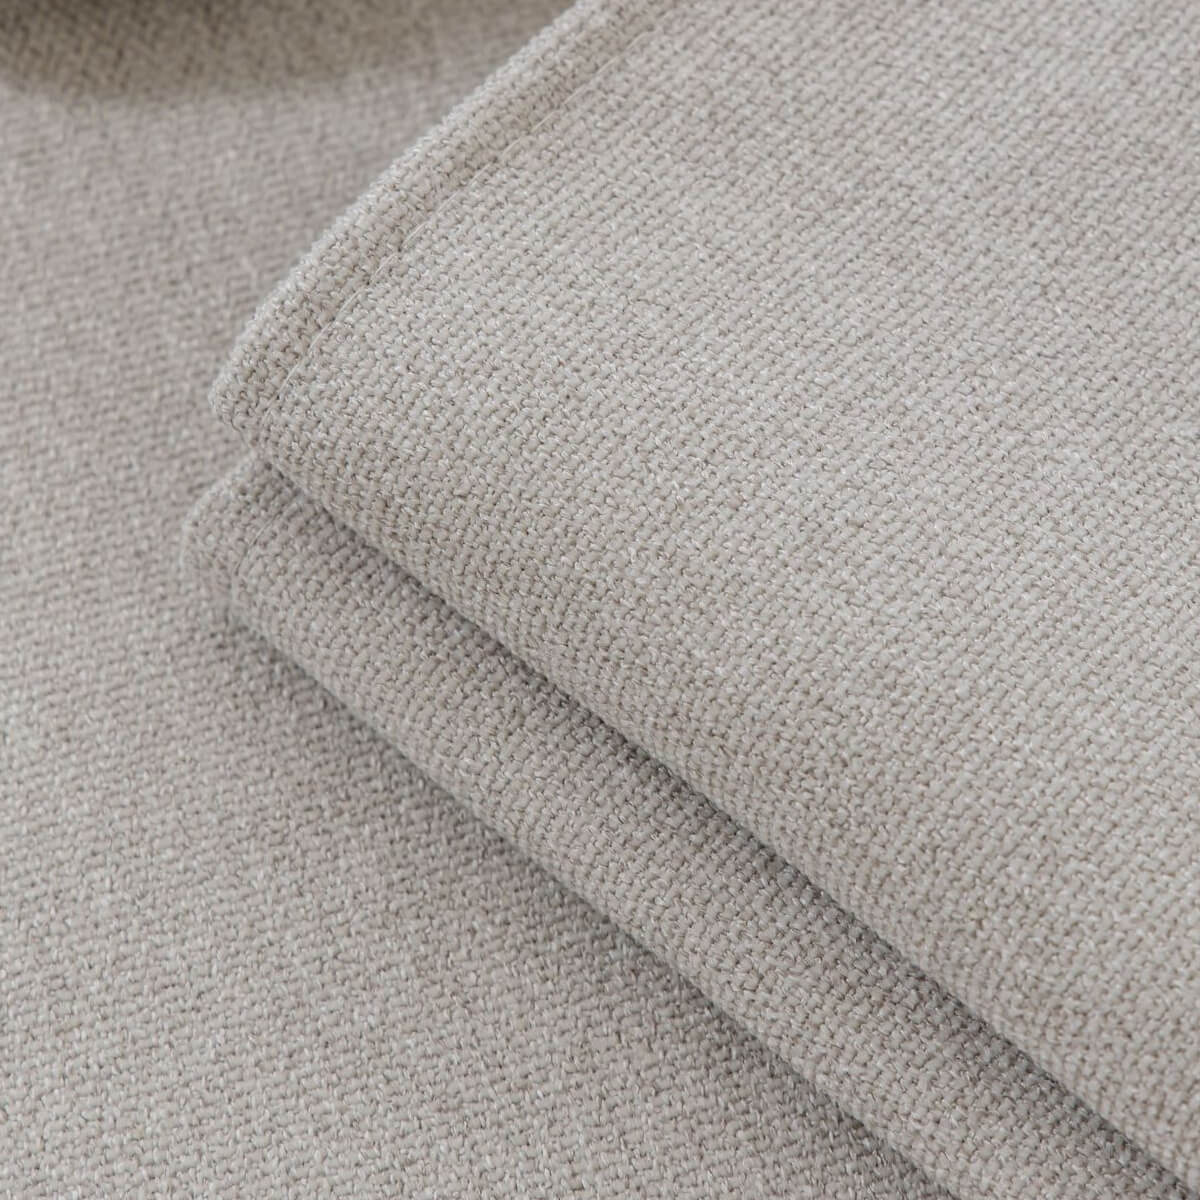 Thick Linen Anti-Slip Grip Sofa and Couch Protector, Sectional Sofa Cover, Sofa Arm Covers